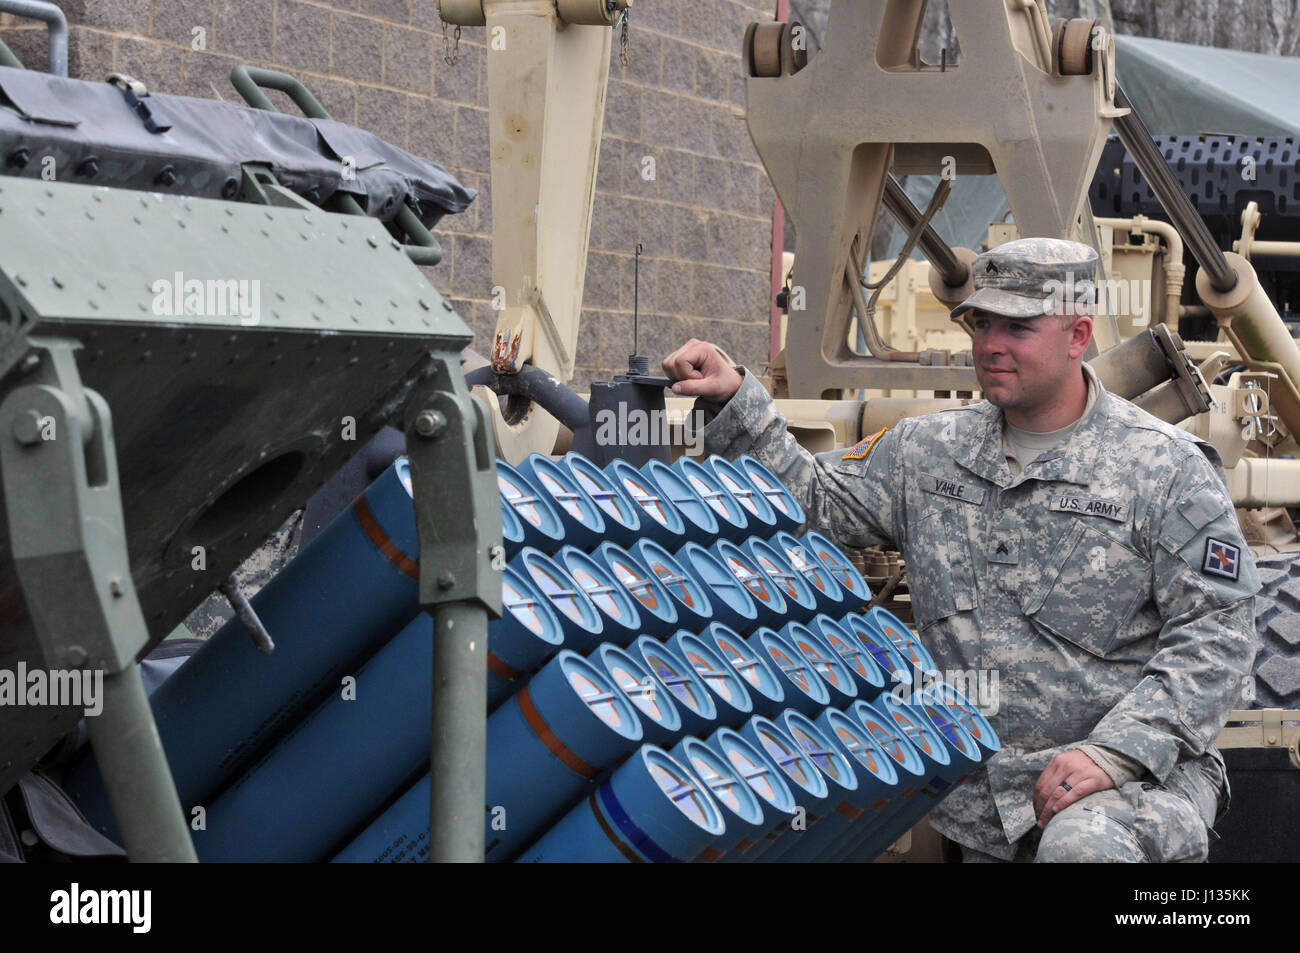 U.S. Army Reserve Cpl. Nicholas Vahle with the 979th Mobility Augmentation Company, 478th Engineer Battalion, 926th Engineer Brigade, 412th Theater Engineer Command, based in Lexington, Ky., pauses to look at 40 training mine canisters in one panel of a M136 Volcano weapons system during the company's training at Wilcox Range on Fort Knox, Ky.,April 1, 2017. This was part of Engineer Qualification Table XII. This company was the first U.S. Army Reserve unit to accomplish this feat. (U.S. Army Reserve Photo by Sgt. 1st Class Clinton Wood) Stock Photo